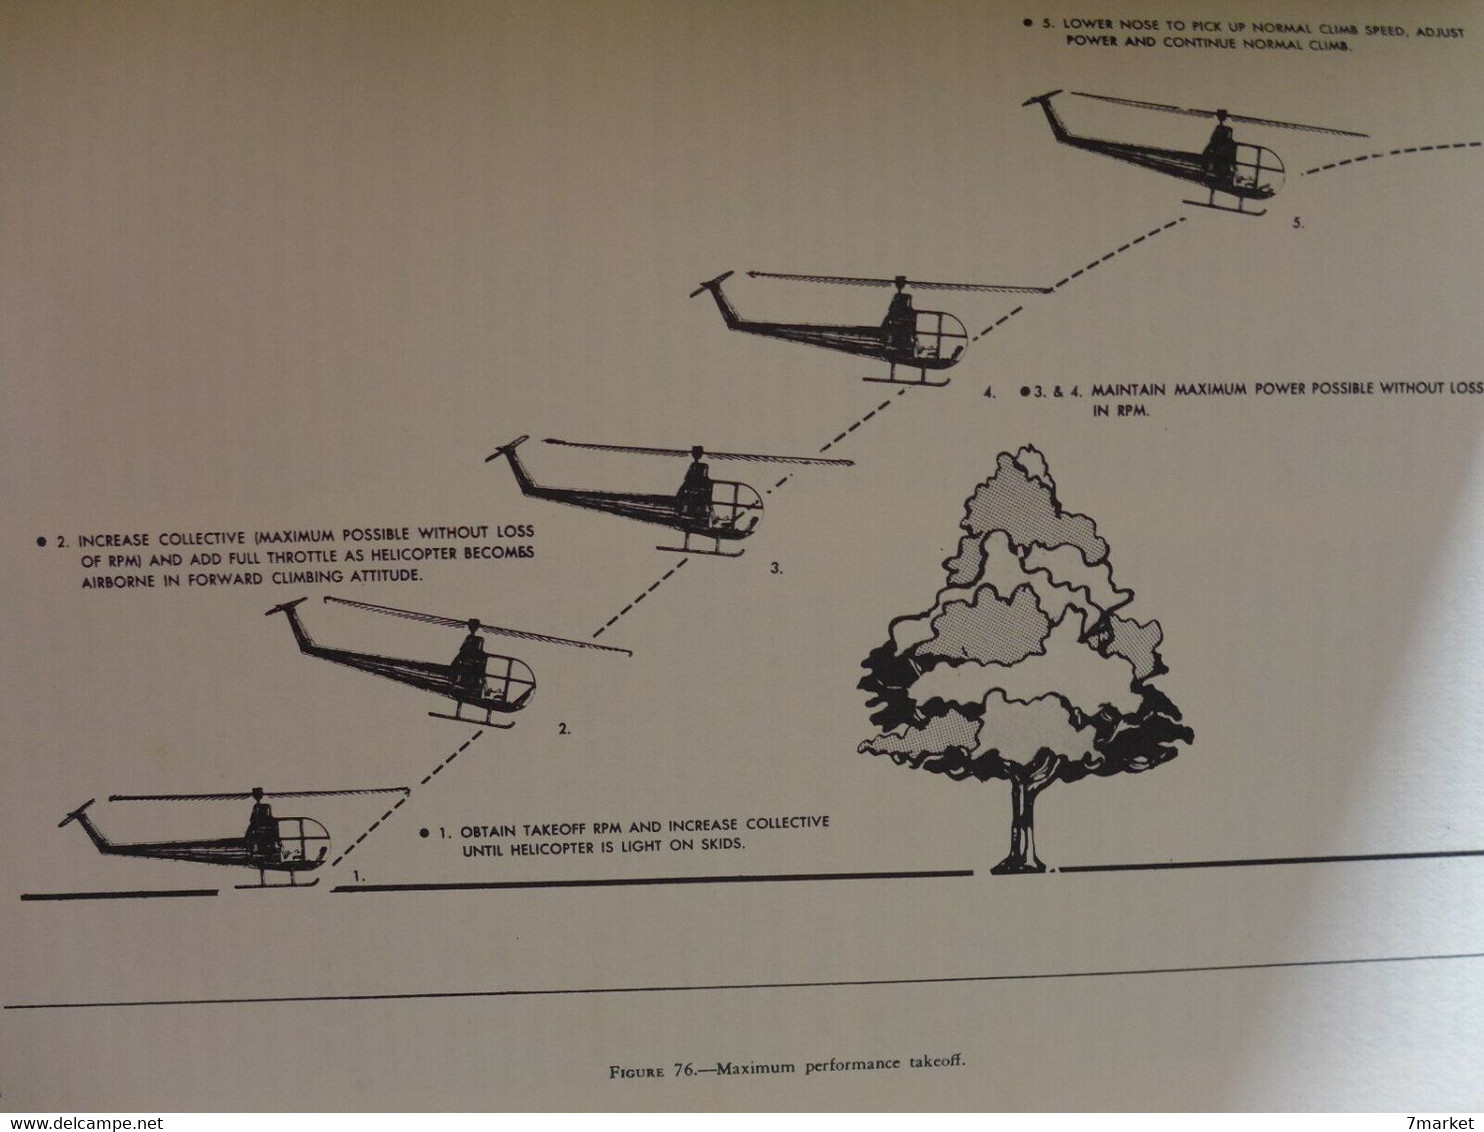 Basic Guide To Helicopters. Helicopters Aerodynamics, Performance & Flight Maneuvers / éd. Drake - 1978; En Anglais - Hubschrauber